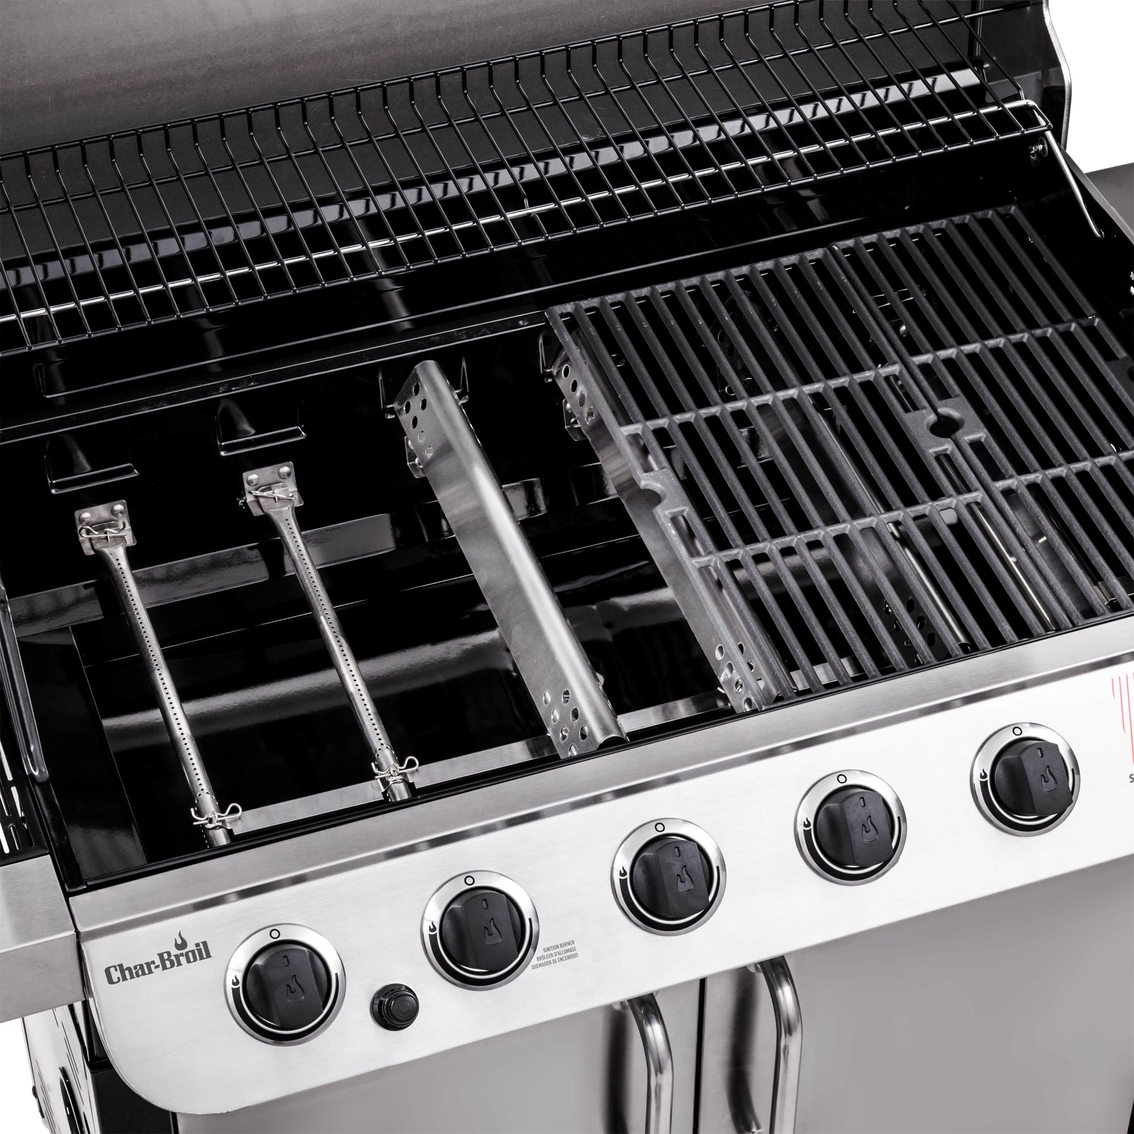 Char-Broil Performance Series 6 Burner LP Gas Grill - Image 4 of 6